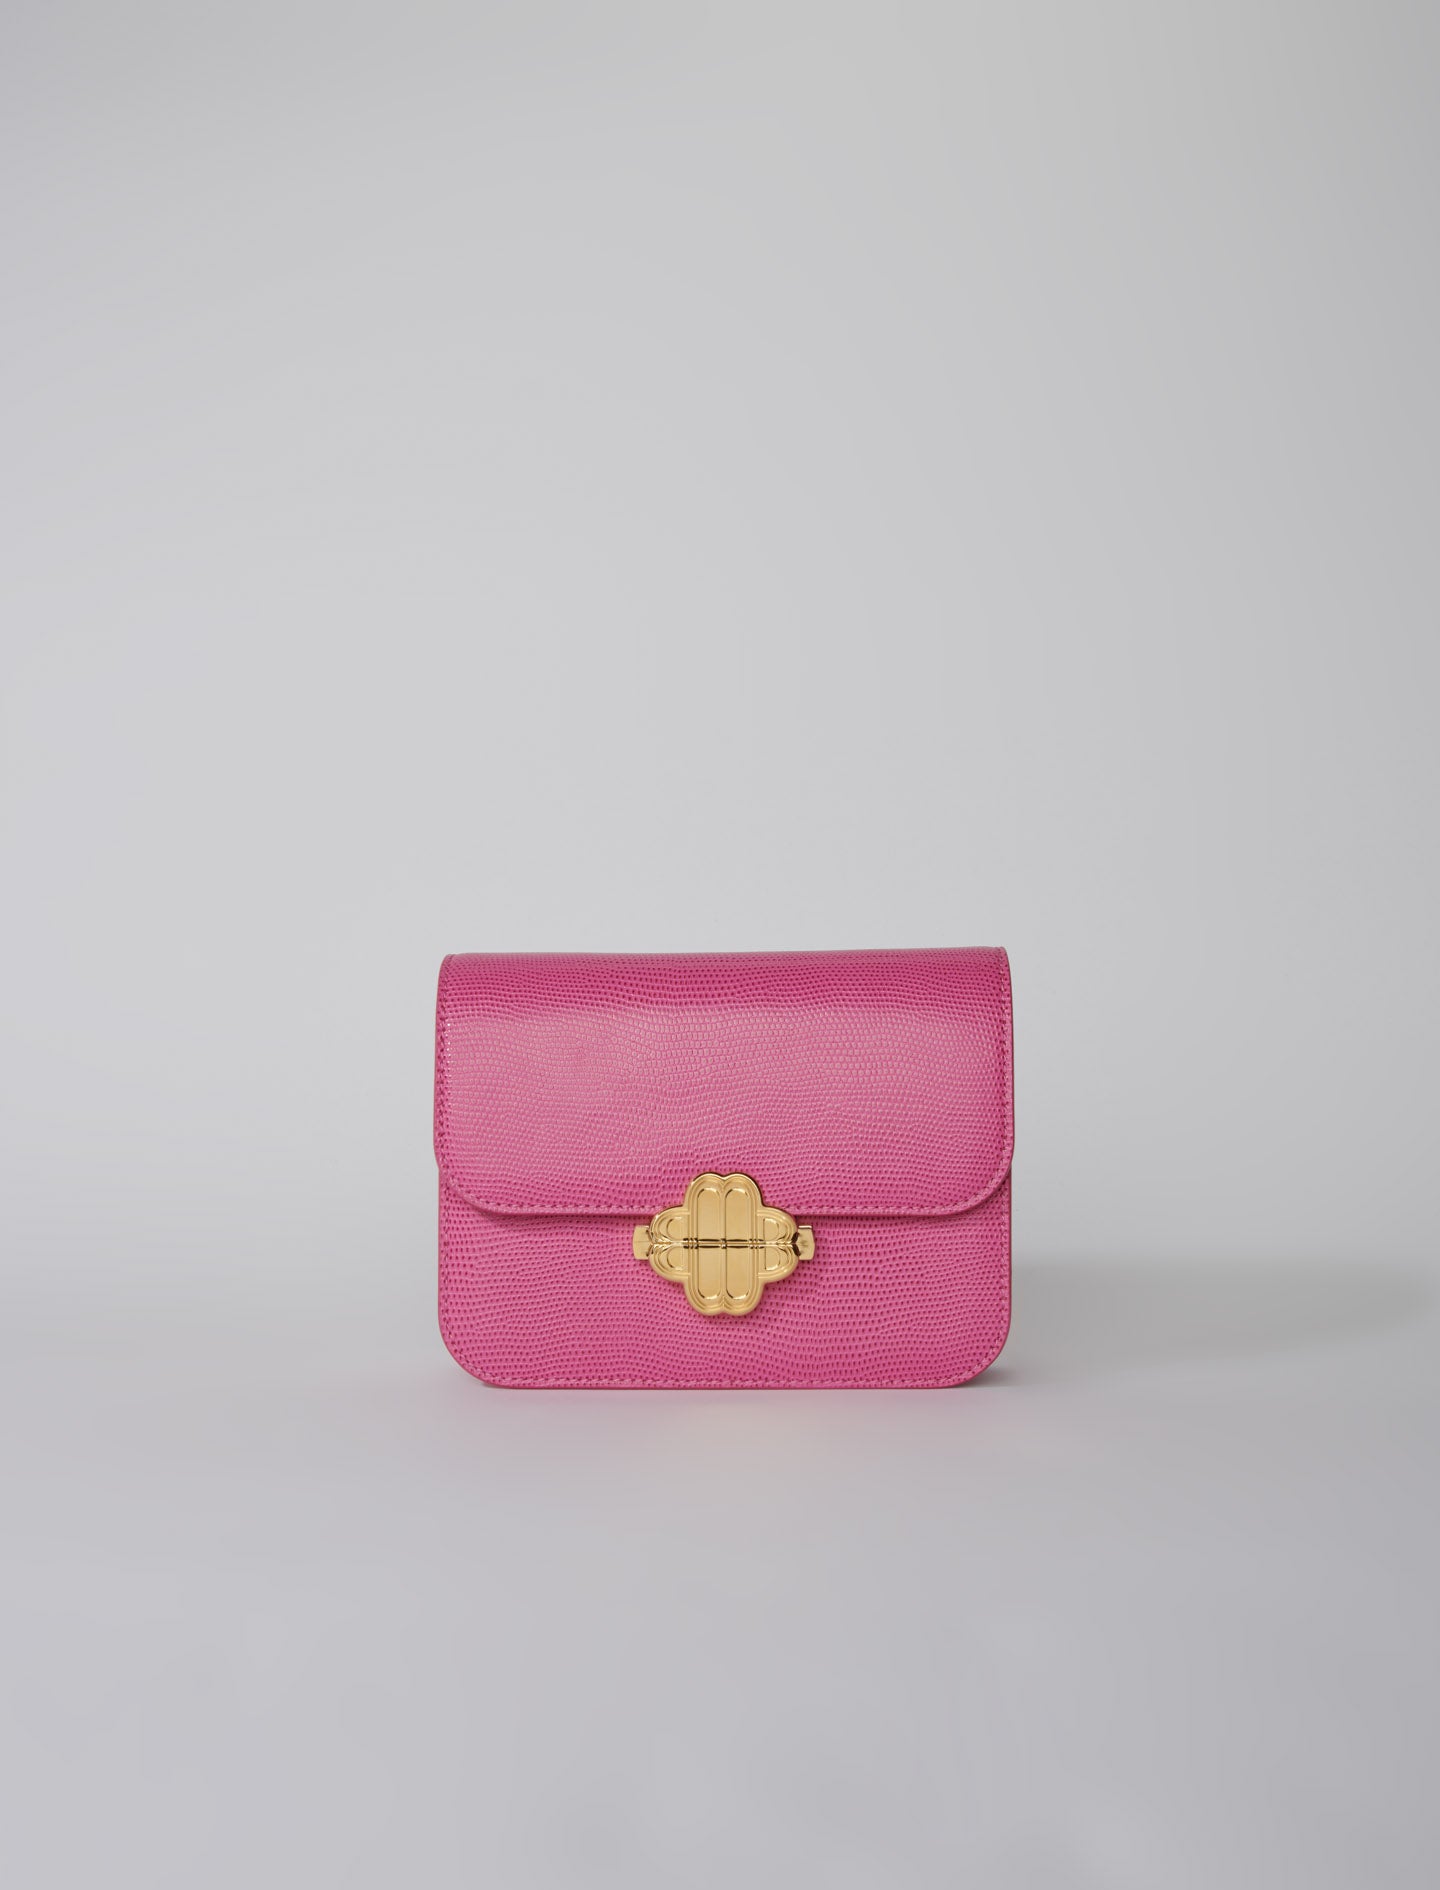 Fuchsia  featured Lizard-effect embossed leather bag